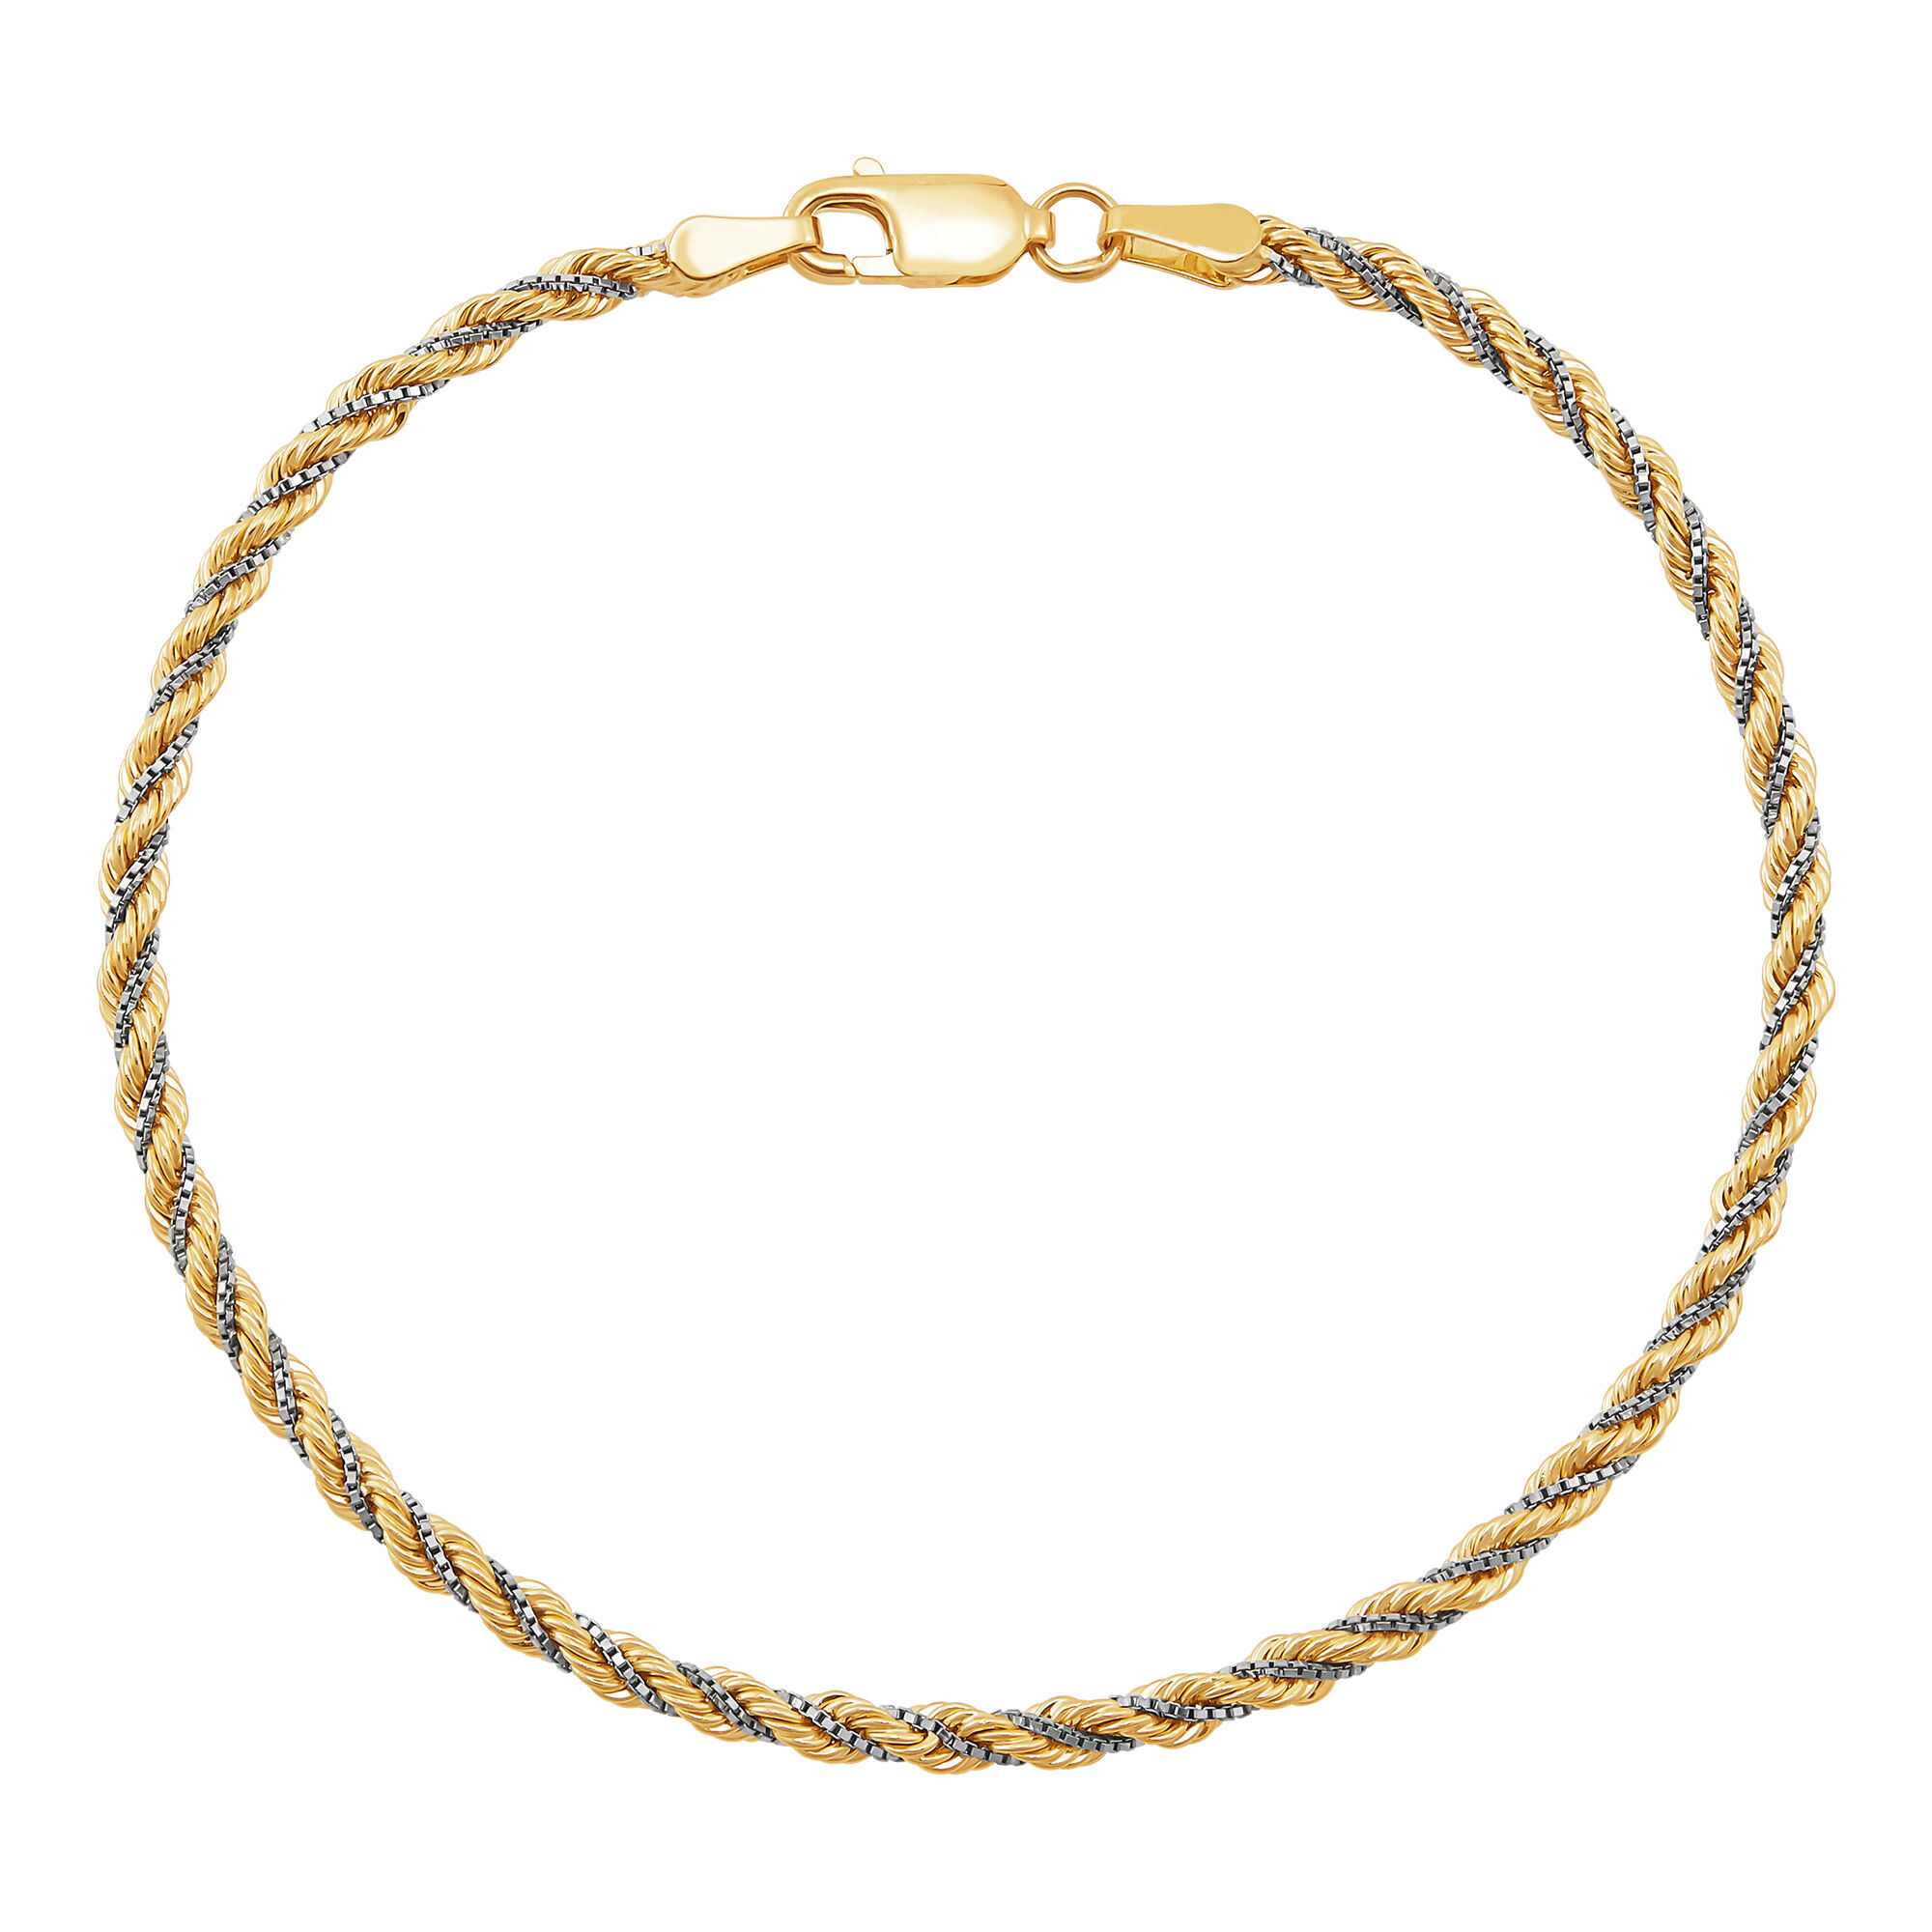 Twisted Rope Chain Bracelet in 10K Yellow and White Gold